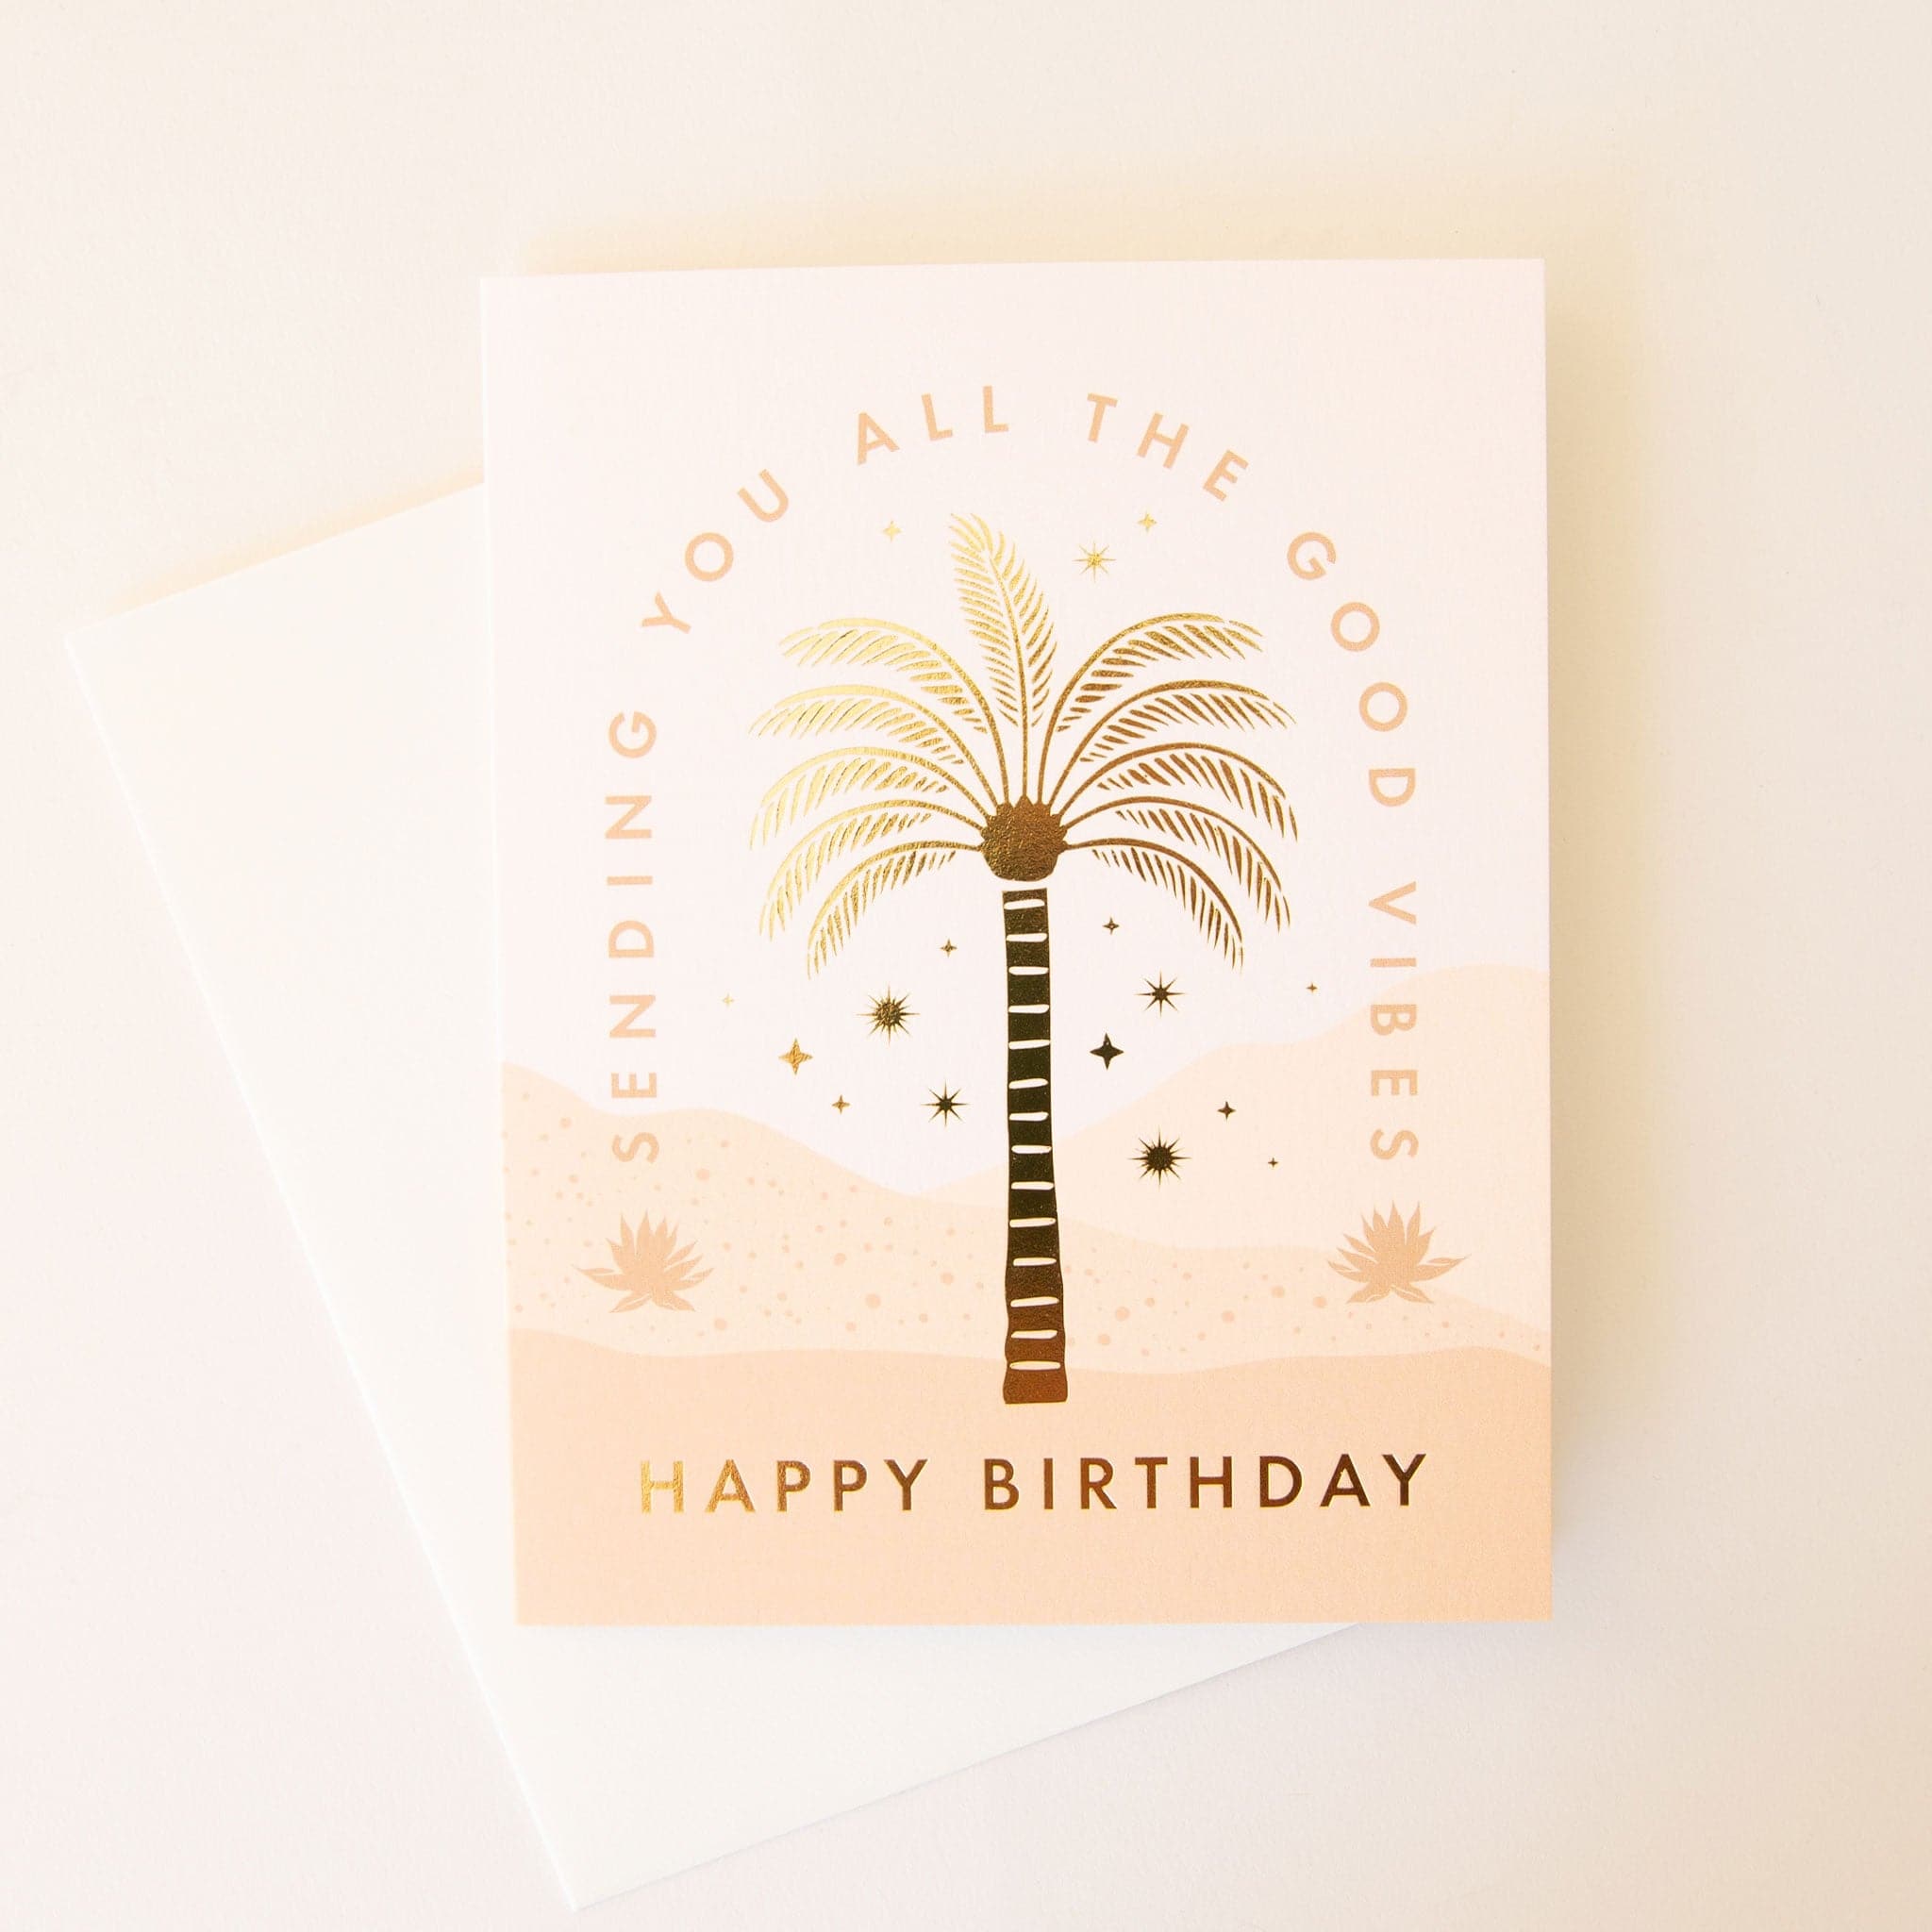 Warm toned birthday card complete with a desert scene. The text &#39;Sending you all the good vibes&#39; curves around a gold foil palm tree and desert stars. Below the scene reads &#39;Happy Birthday&#39; in capital gold foil lettering. The card is accompanied by a solid white envelope. 